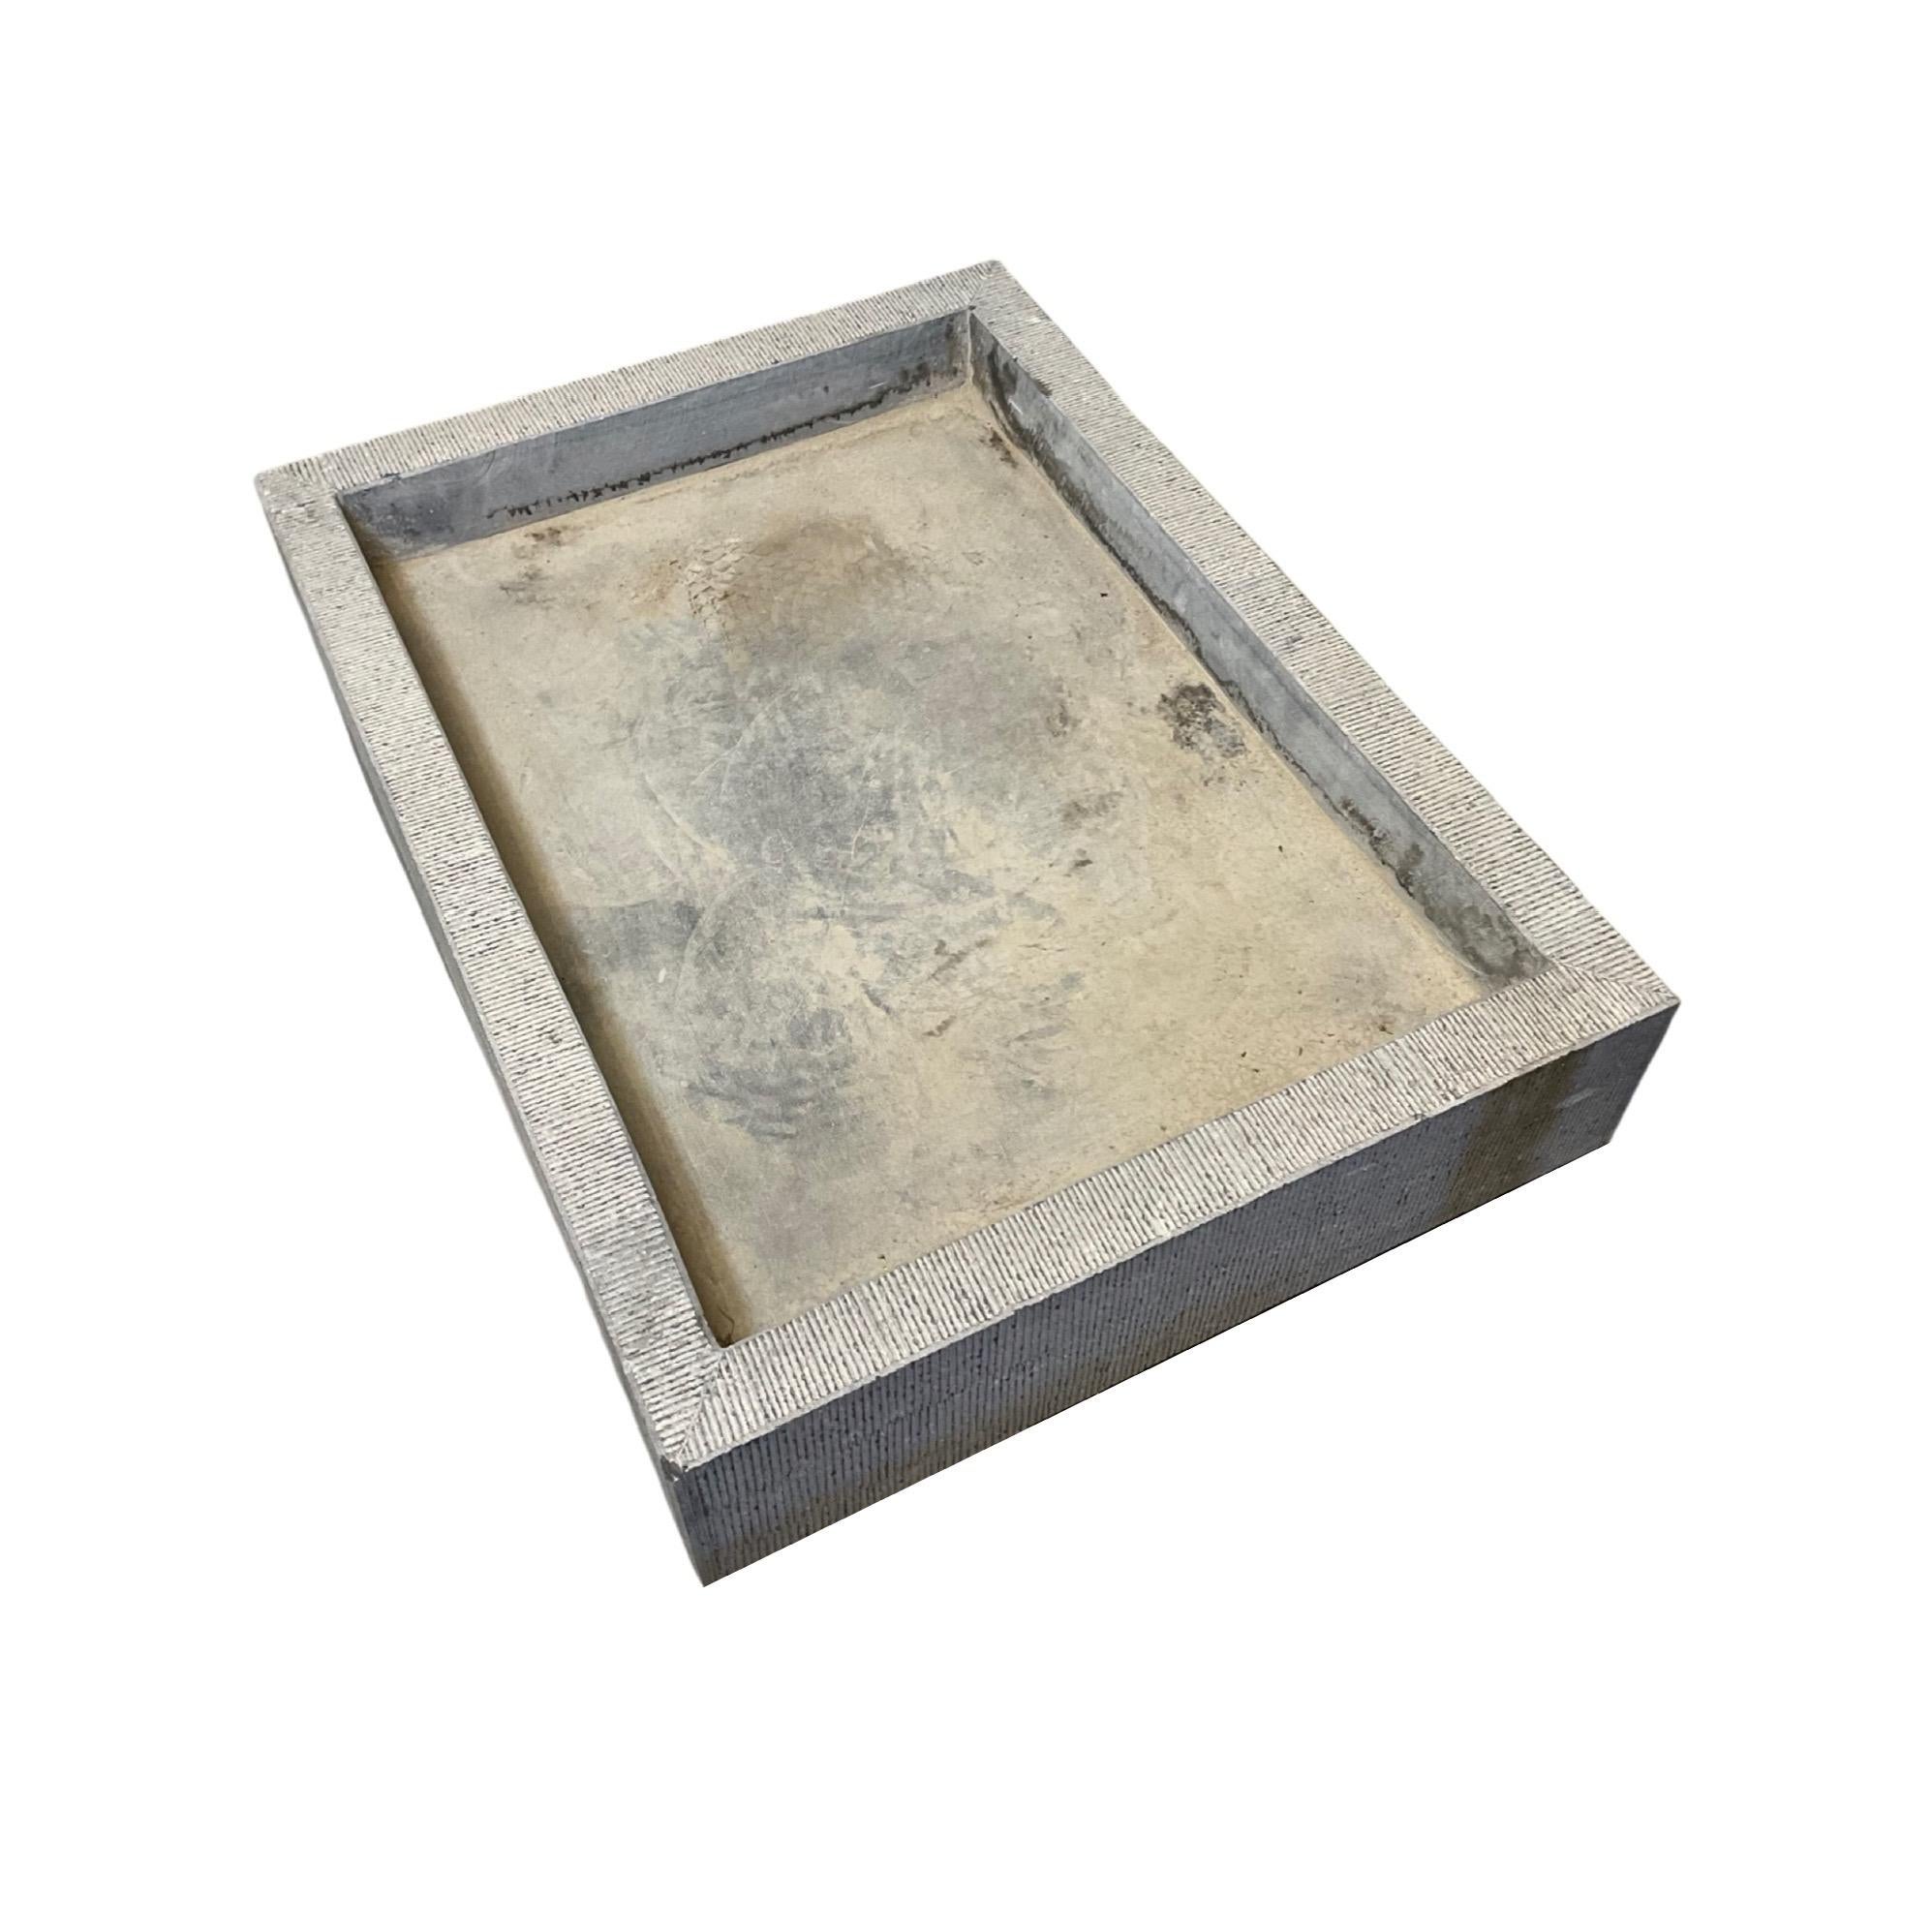 This Belgium Bluestone Sink is crafted from natural stone and has a unique, classical look. Created in the 18th Century, this sink is both durable and beautiful, making it a perfect addition to any kitchen. It is sure to last for many years to come.